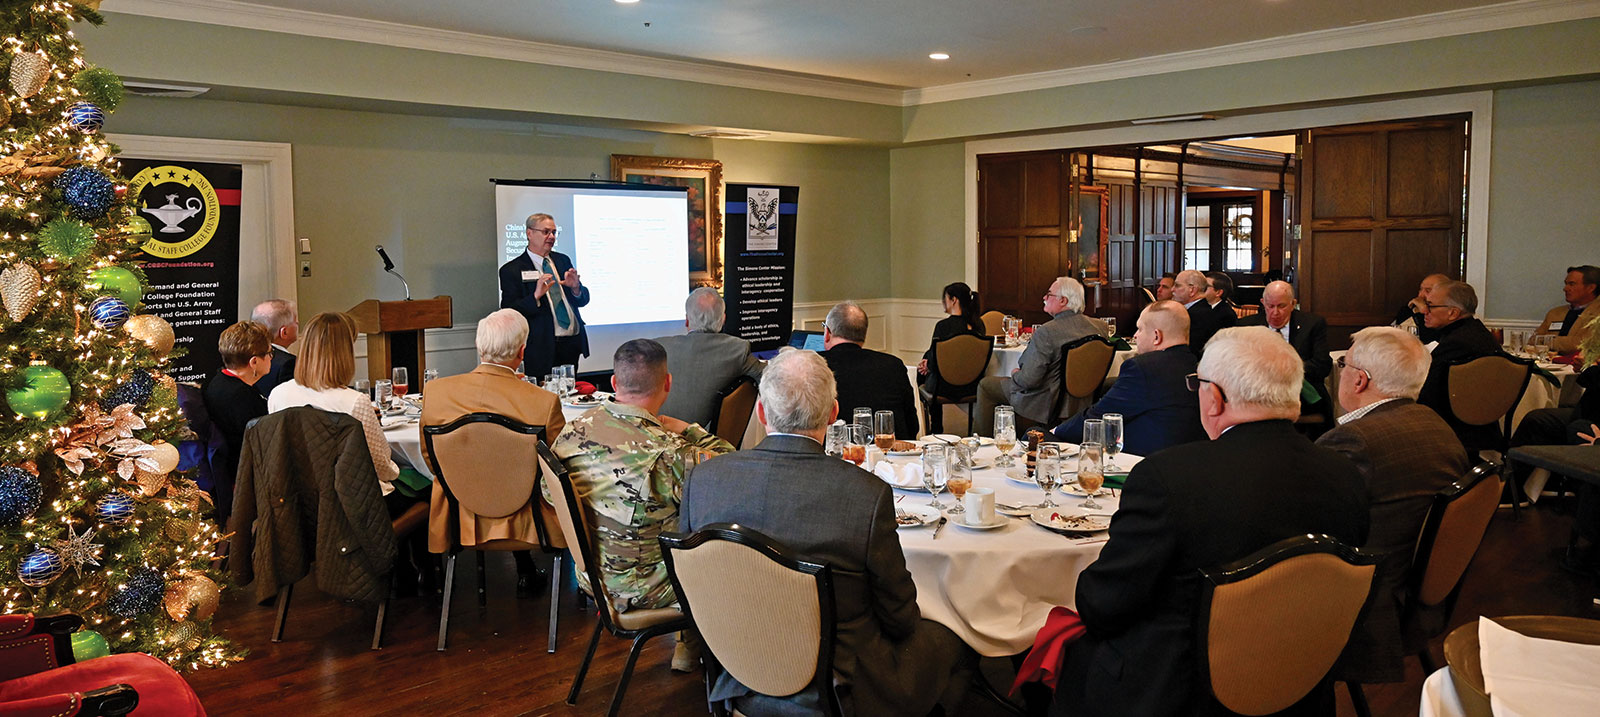 Dr. Allen M. Featherstone, professor and head of Kansas State University’s Agricultural Economics Department, delivers a presentation entitled "Foreign Ownership of U.S. Food and Agricultural Assets" to members of the Arter-Rowland National Security Forum at a luncheon event on Dec. 1, 2022, at the Carriage Club in Kansas City.